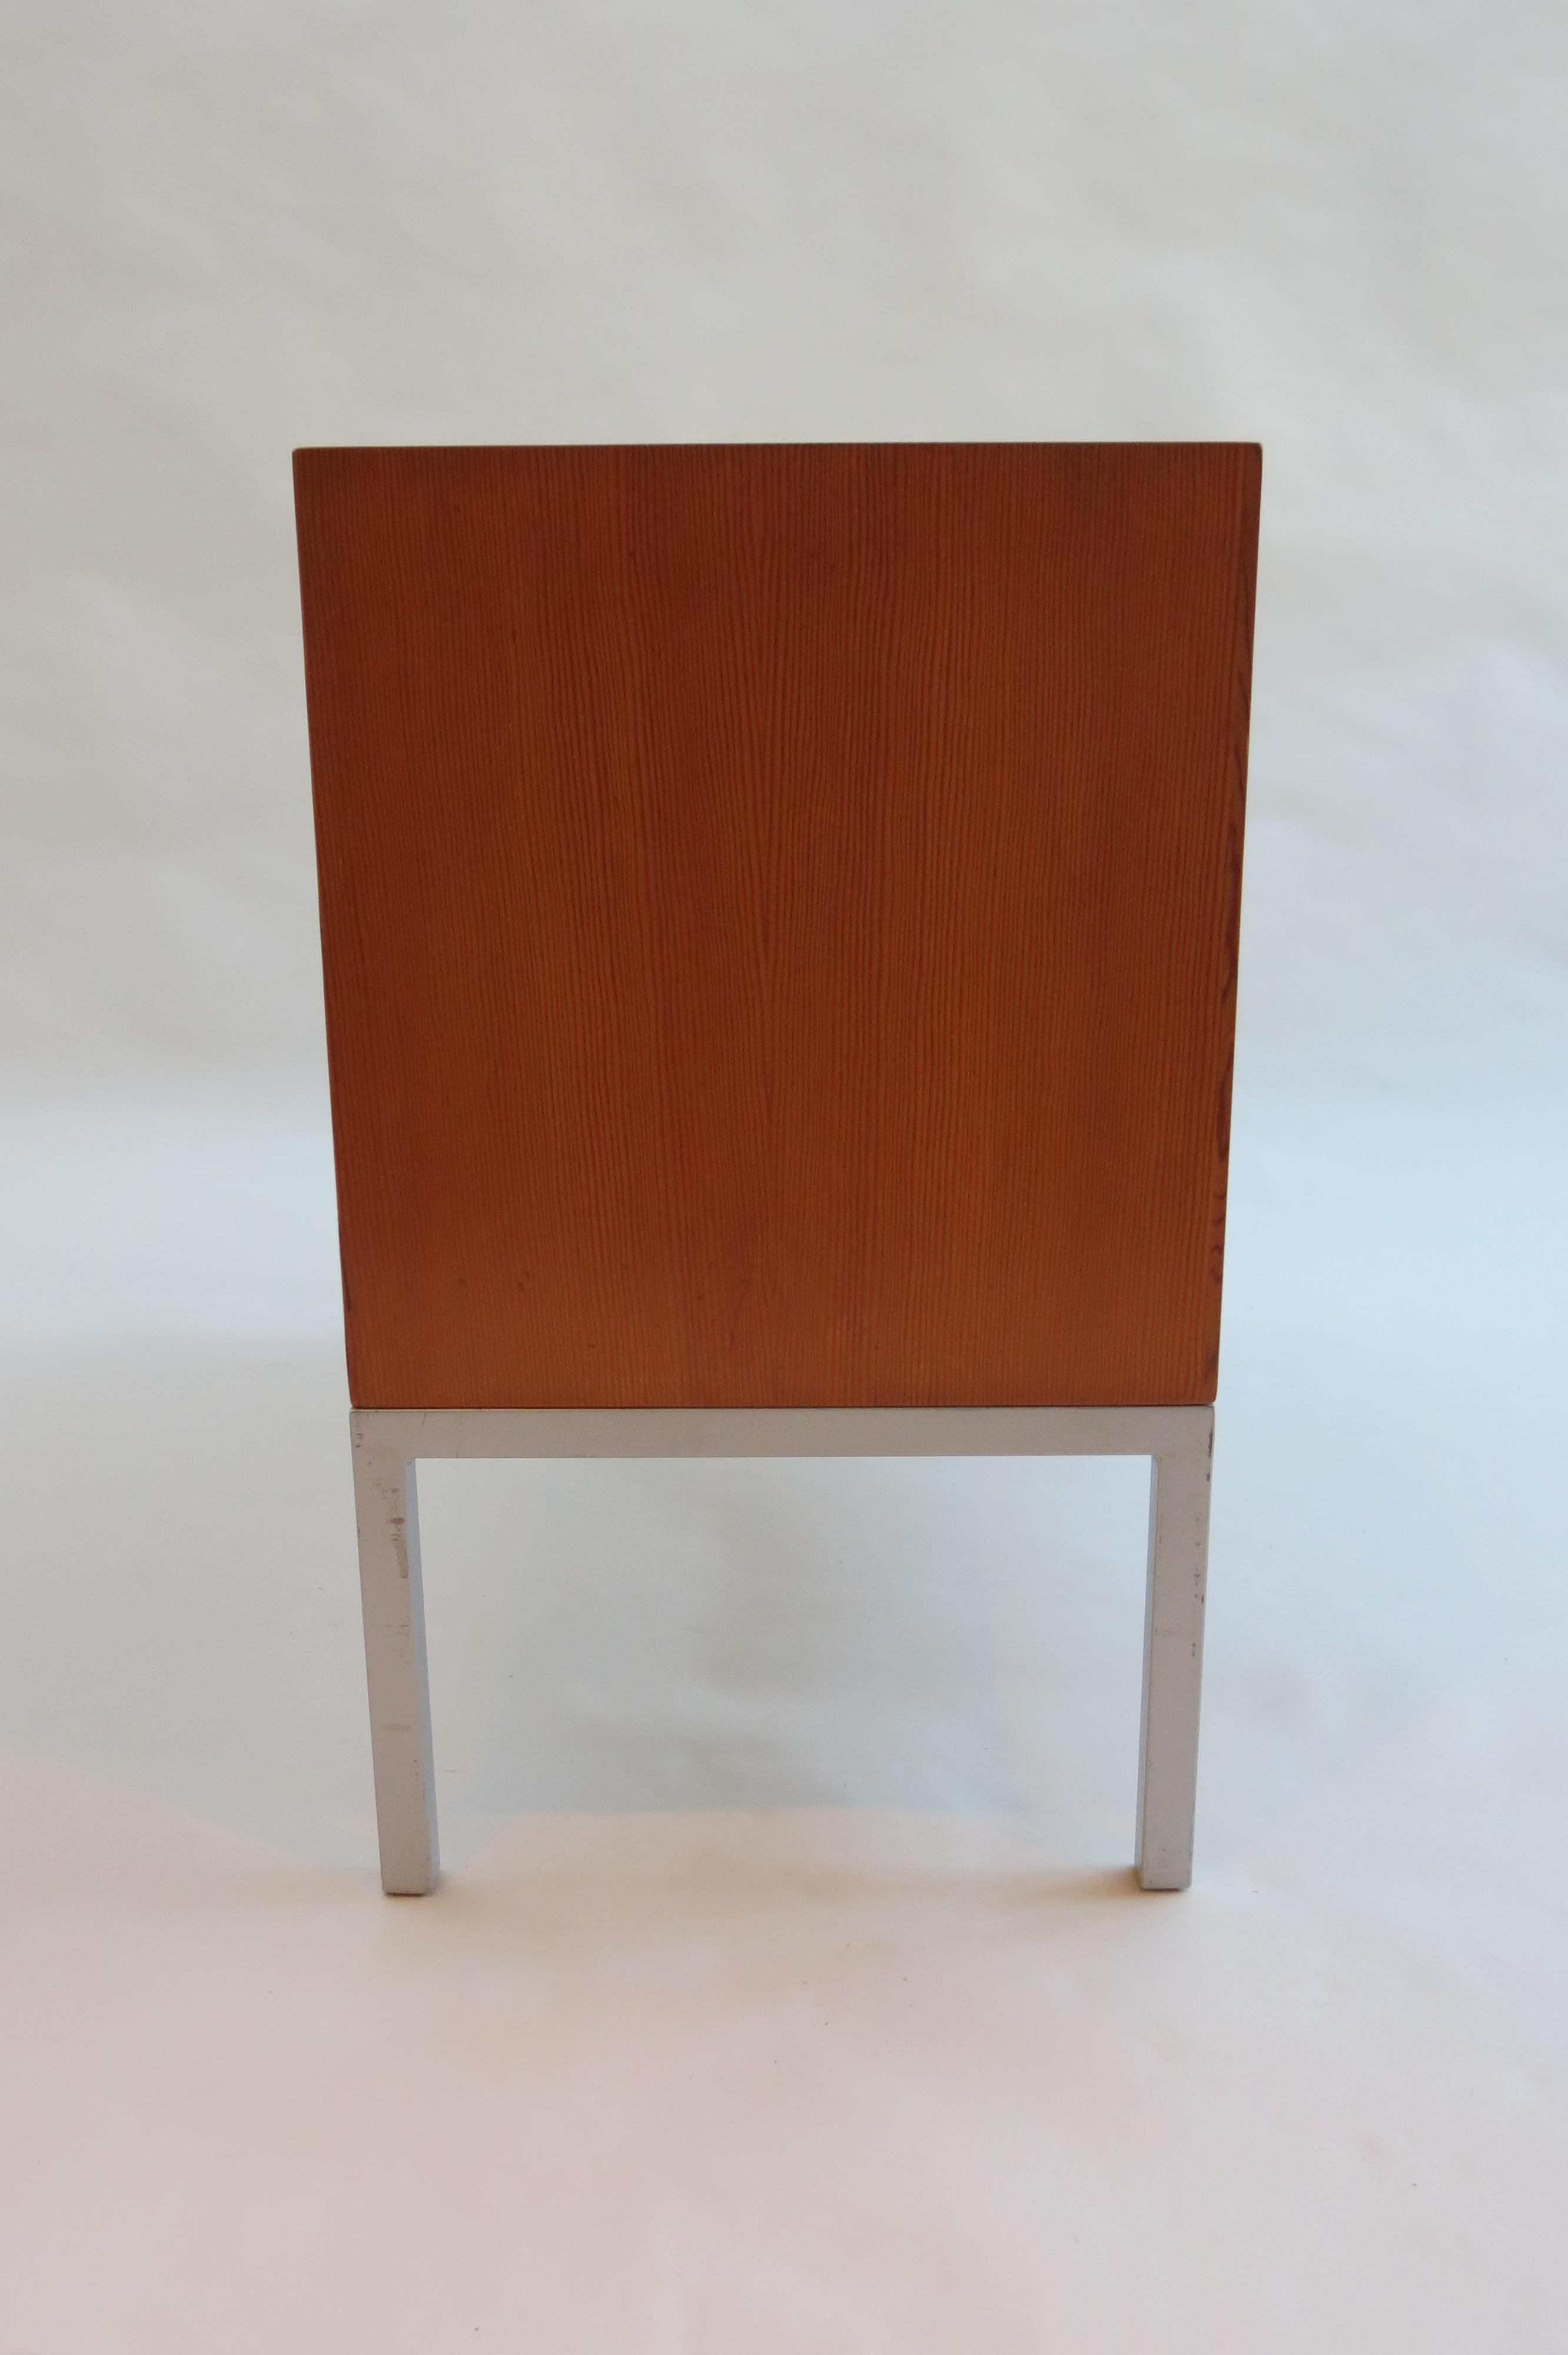 This is a good quality cabinet from the 1960s. The cabinet has an Oregon pine veneer case and painted steel base. The upright shelving dividers can be adjusted to make the openings either wider or narrower. Nice quality with mitred corners. The